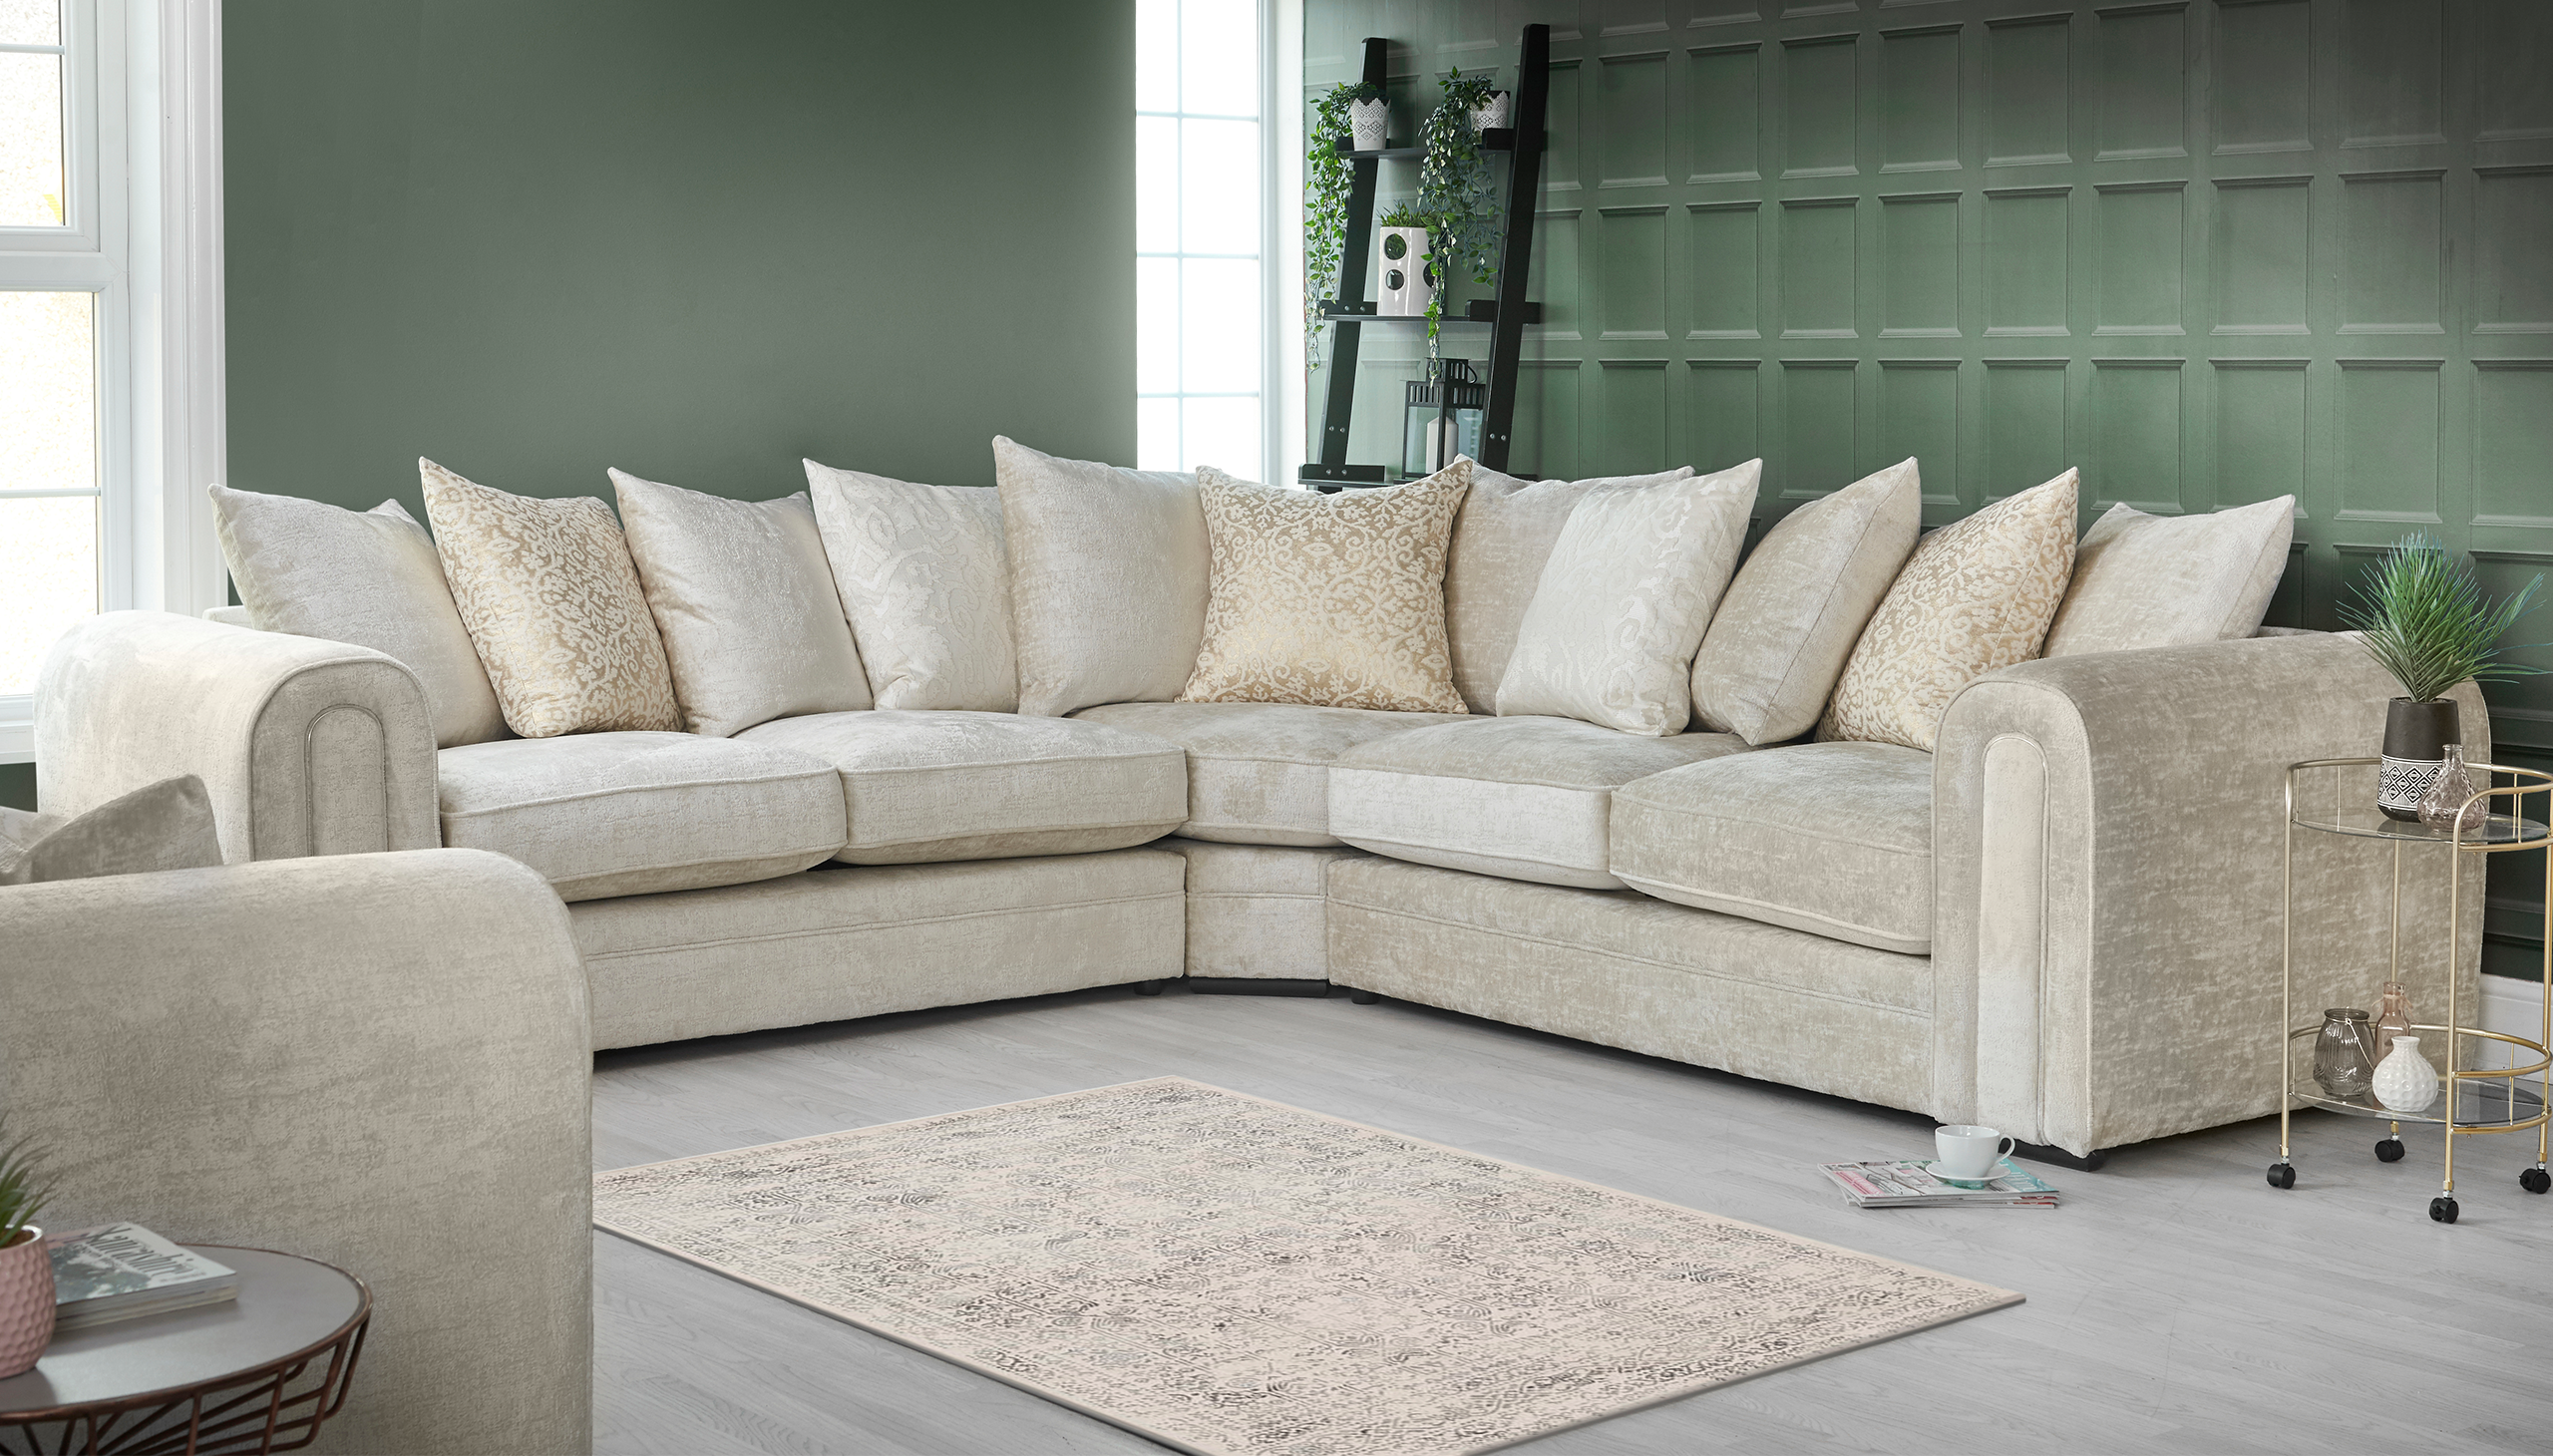 Gatsby 2 Seater Scatter Back Sofa